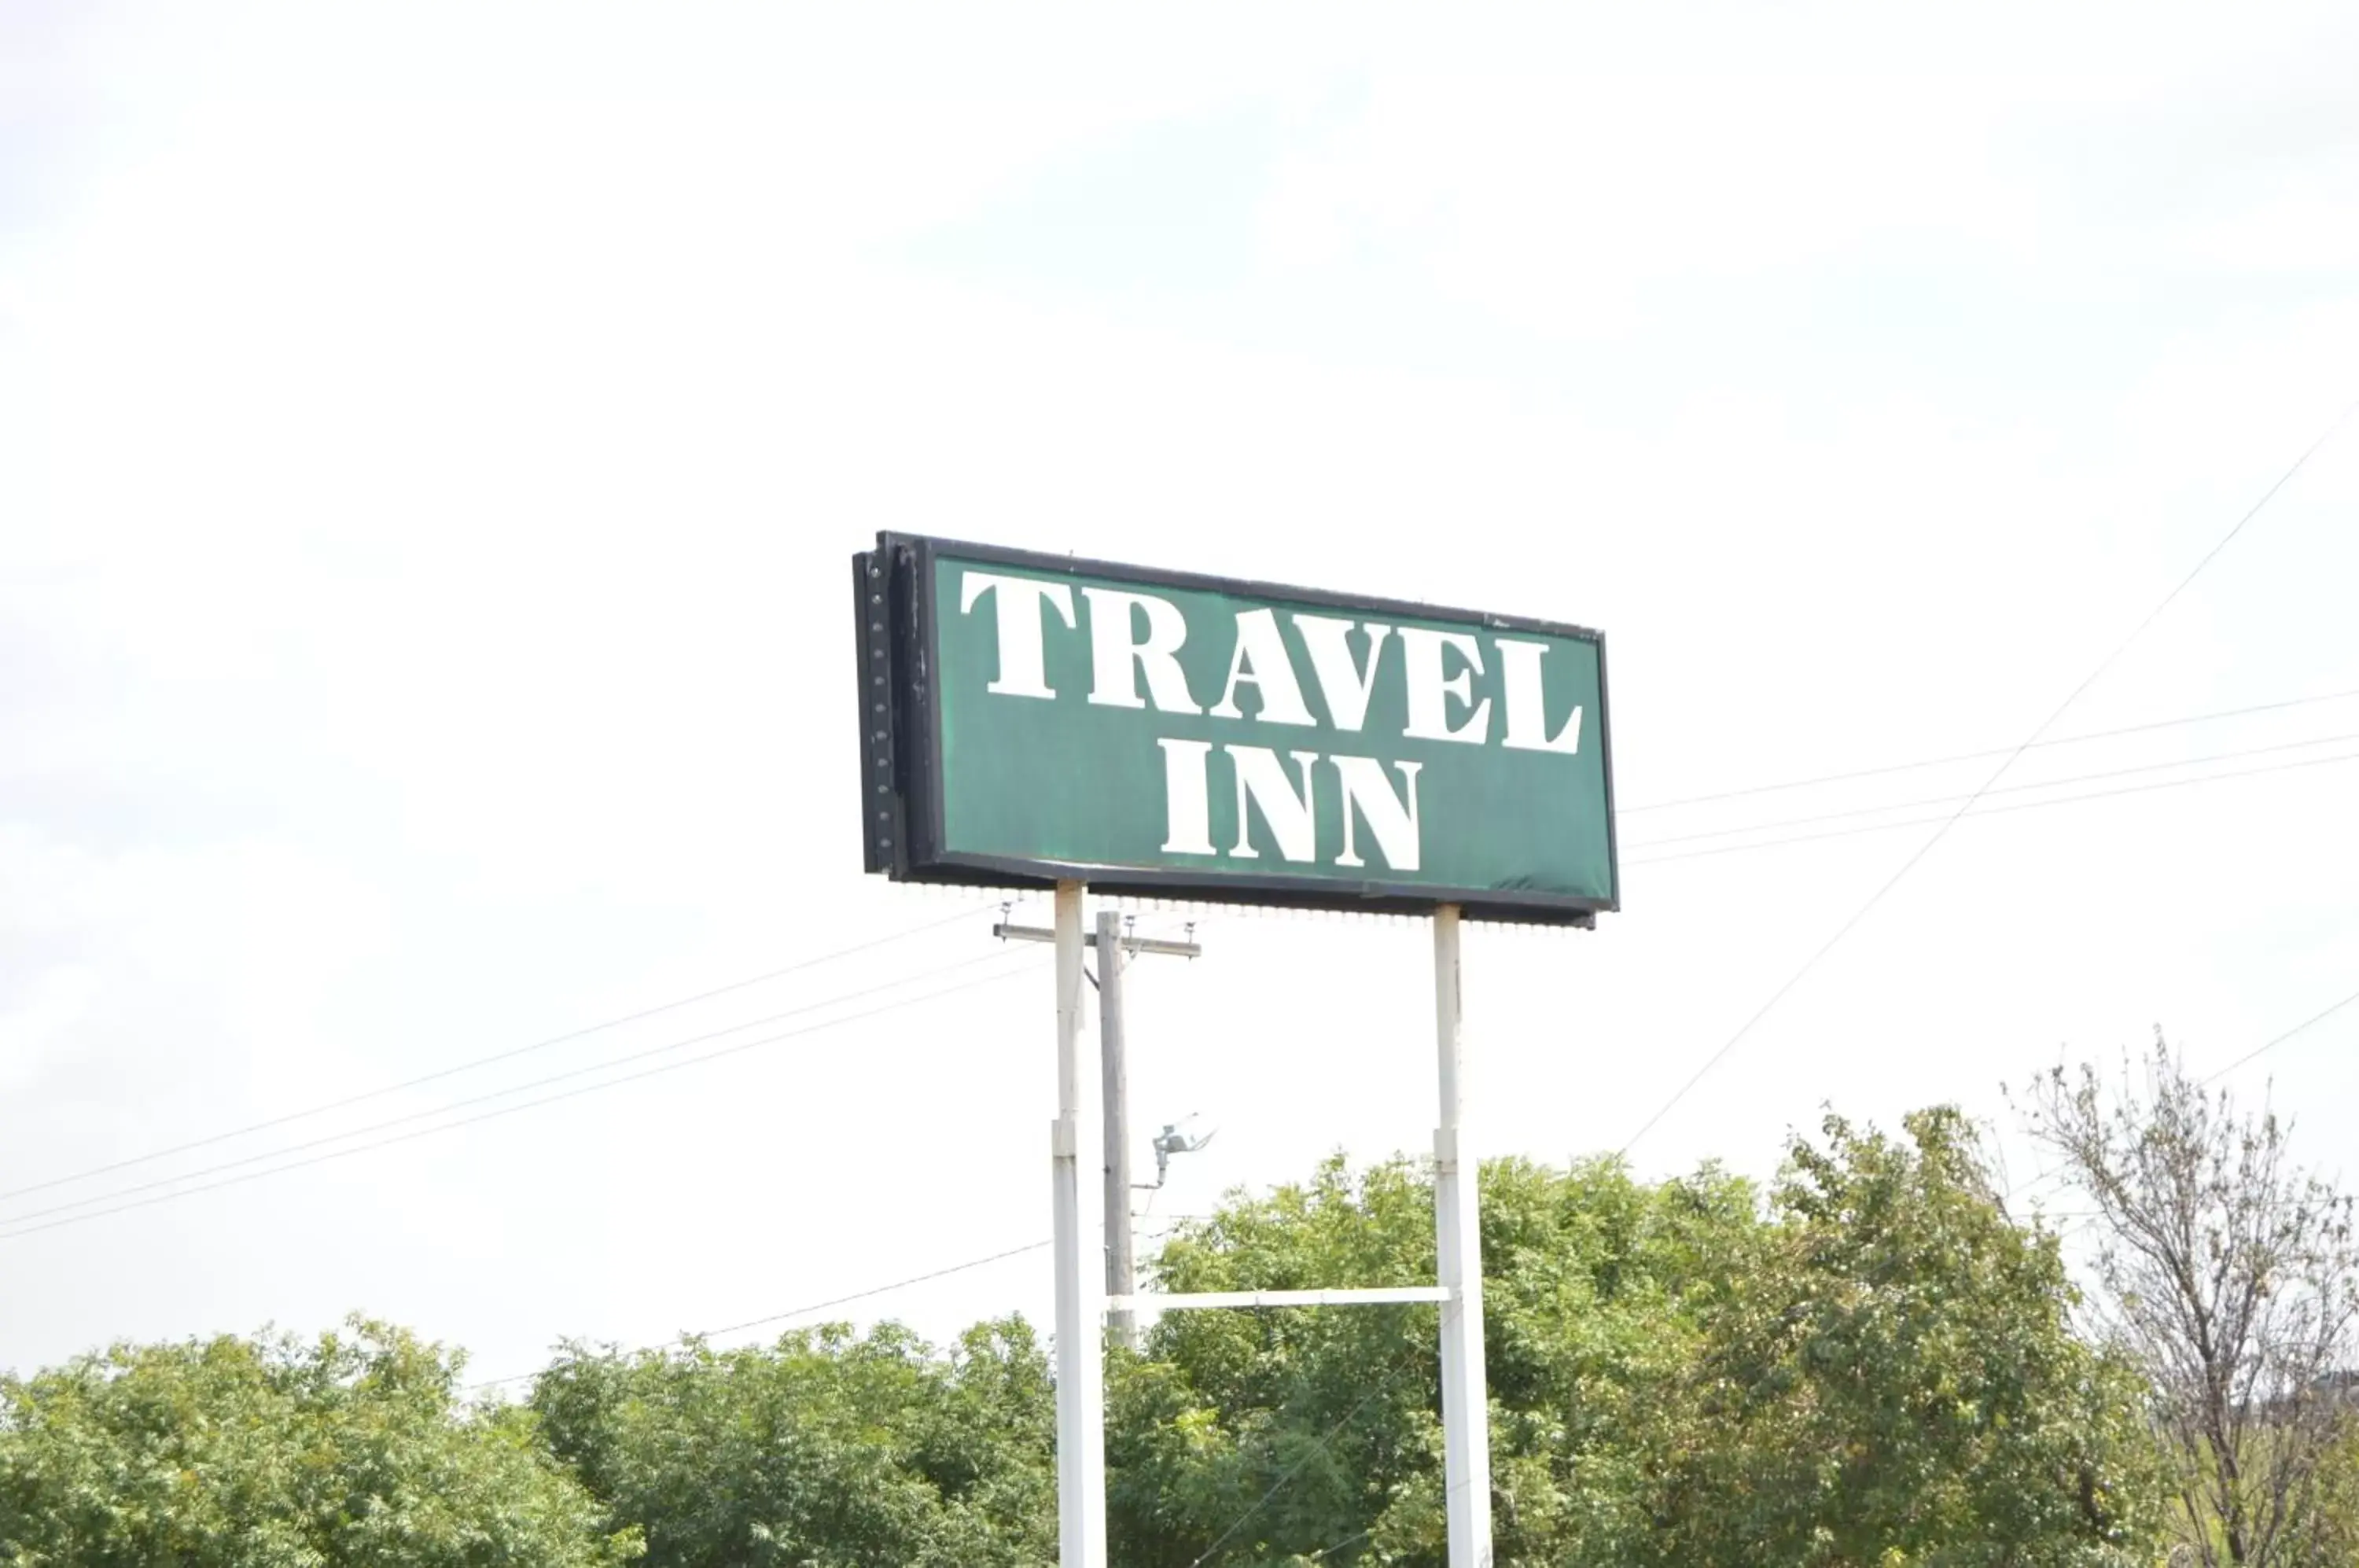 Property logo or sign in Travel Inn Weatherford